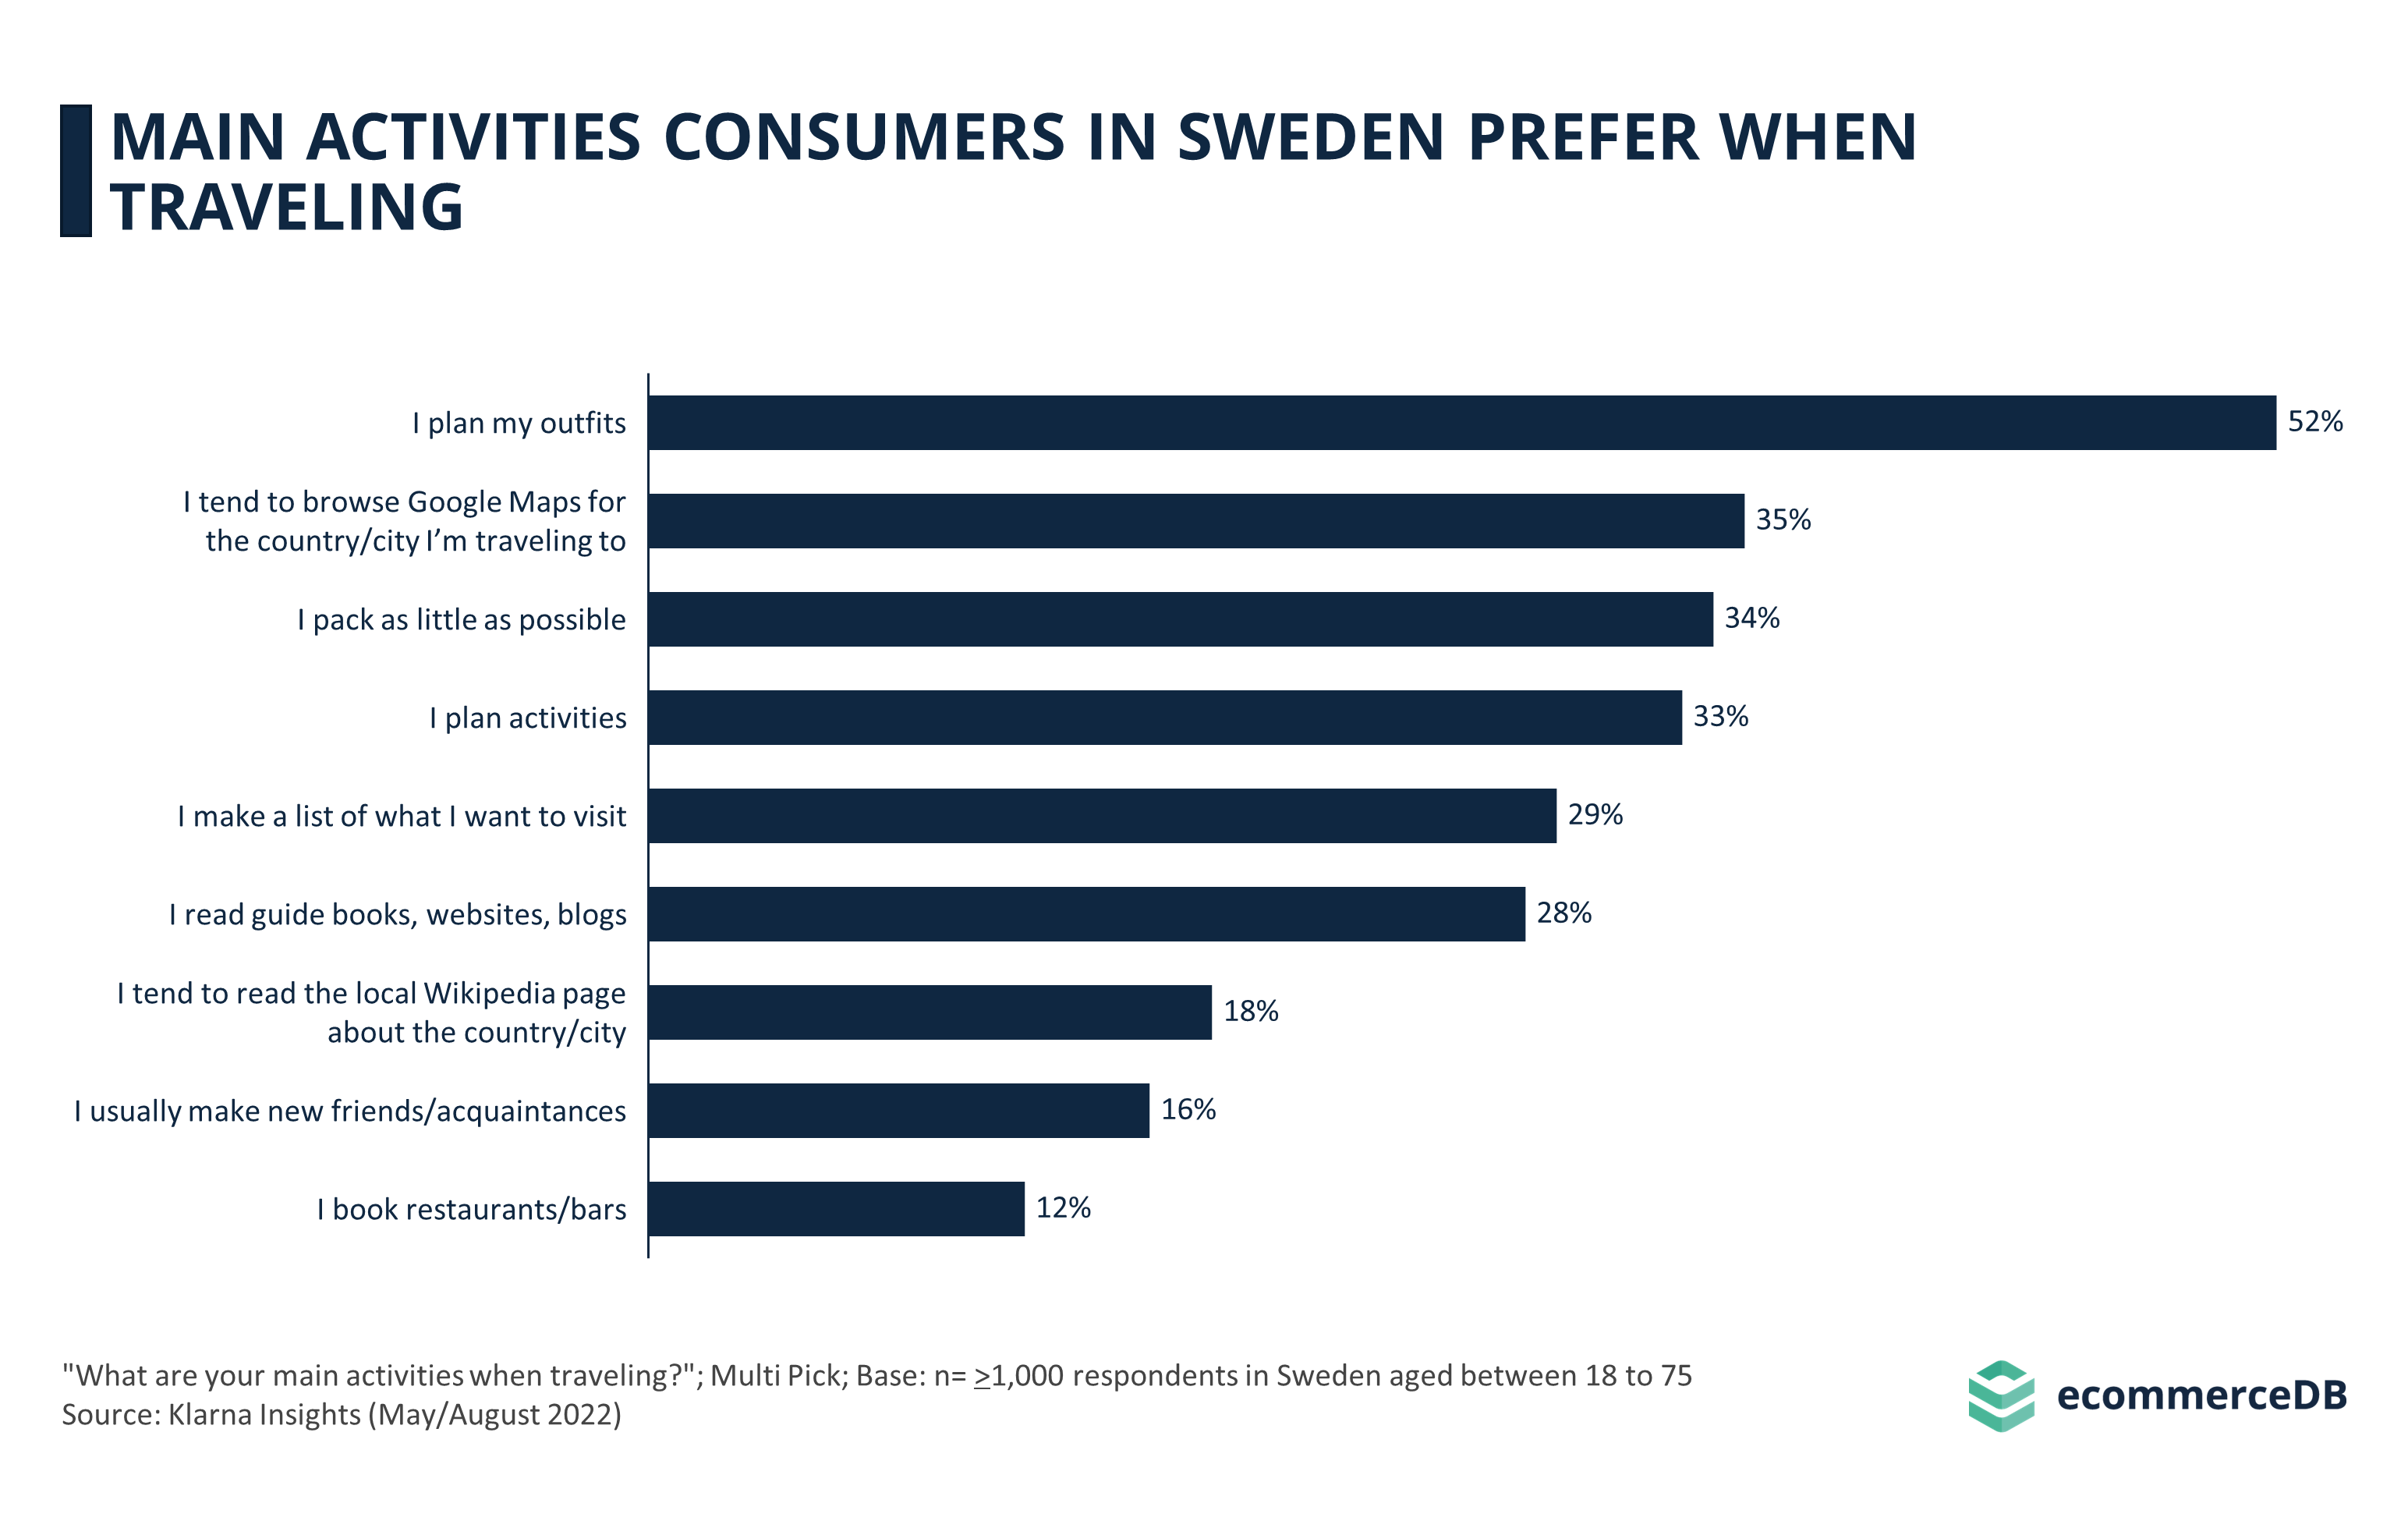 Main Activities Consumers in Sweden Prefer When Traveling 